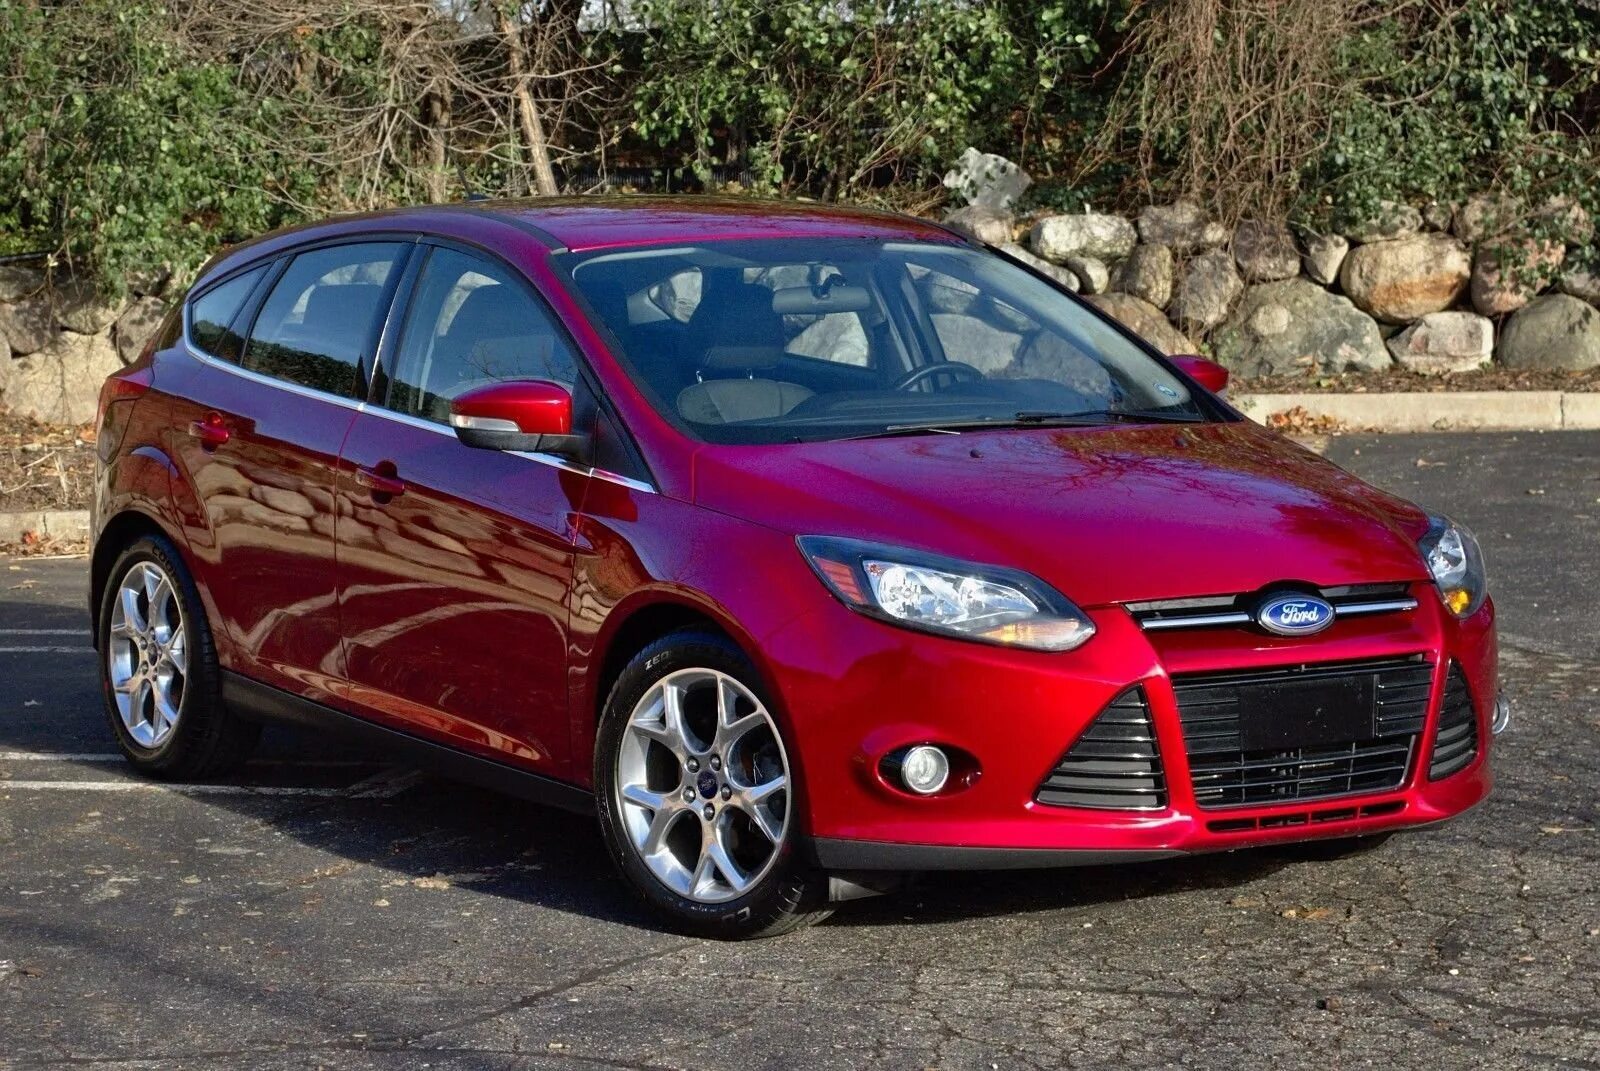 Ford Focus 2013. Форд фокус 3 2013. Ford Focus Hatchback 2013. Ford Focus 2013 Red.